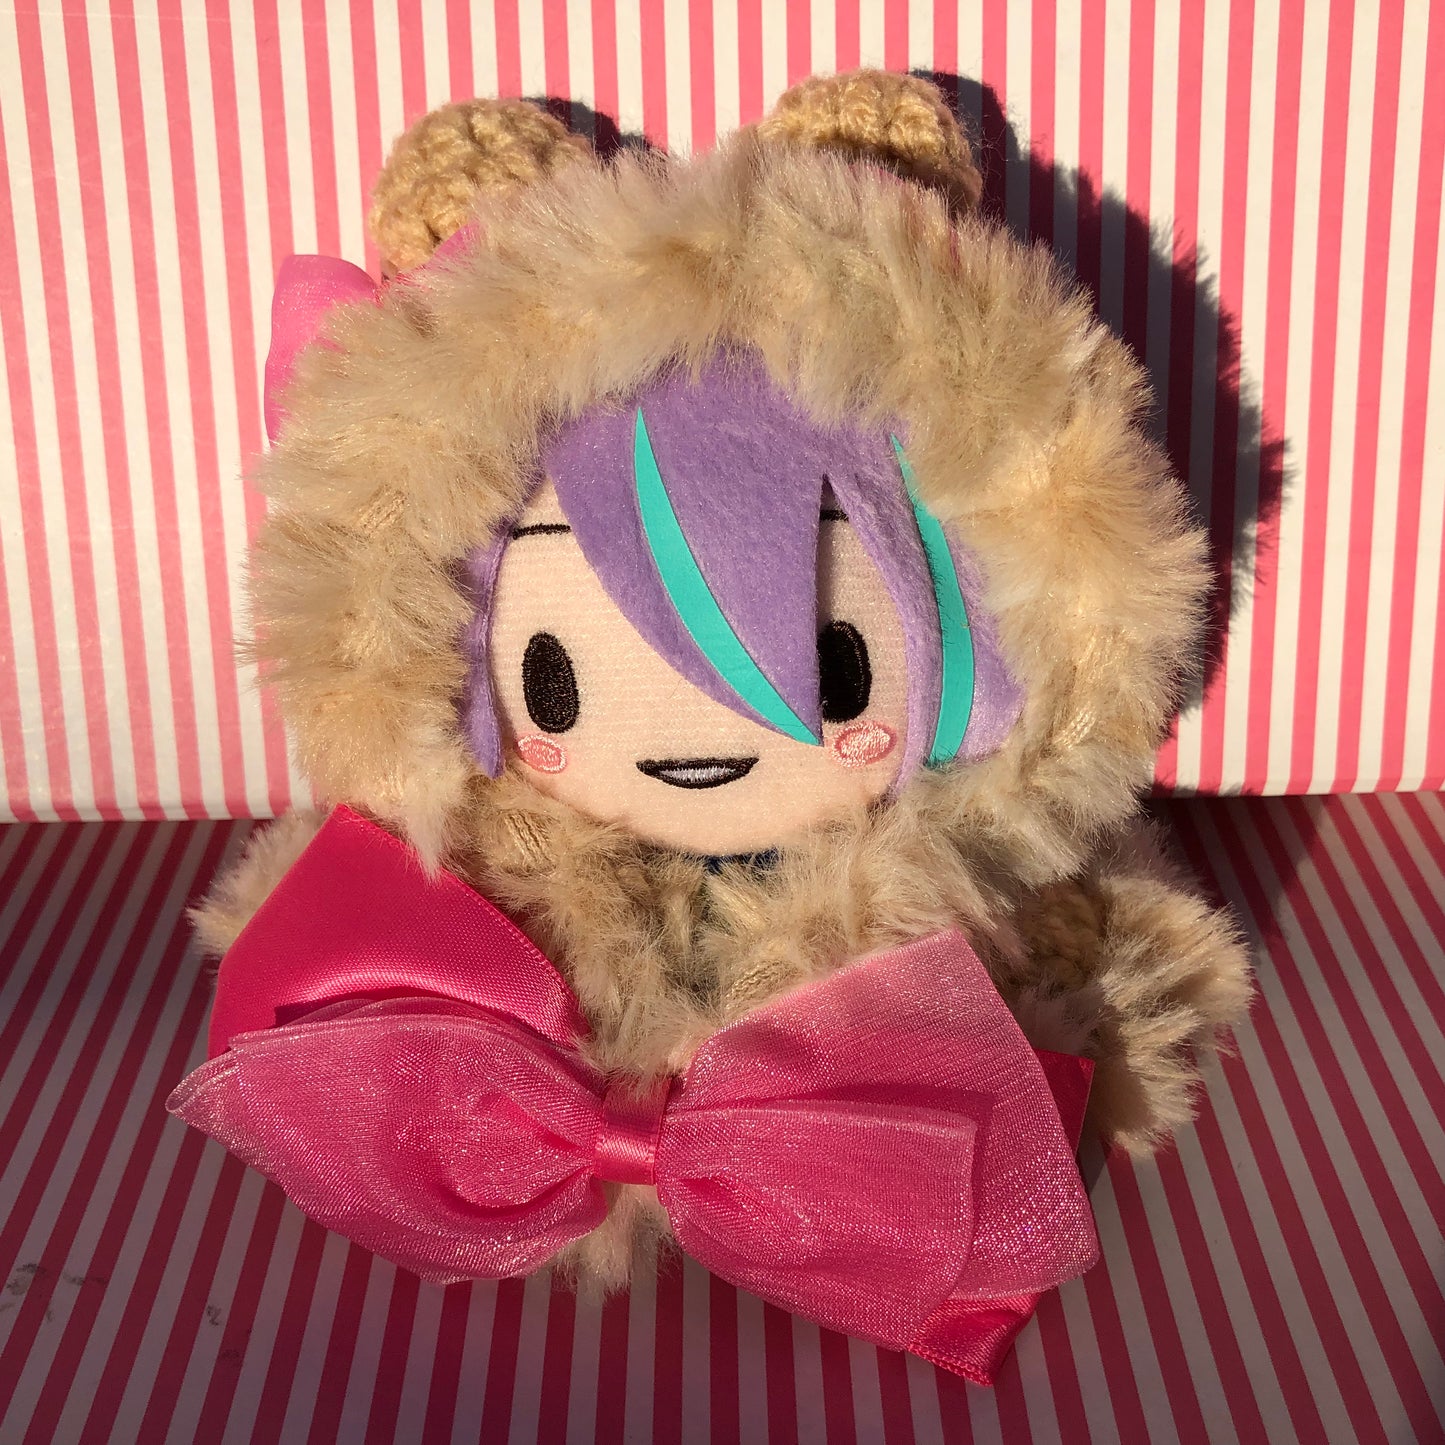 Limited Handmade Christmas Outfit + Nui Project Sekai Colorful Stage Plush! ft. Hatsune Miku